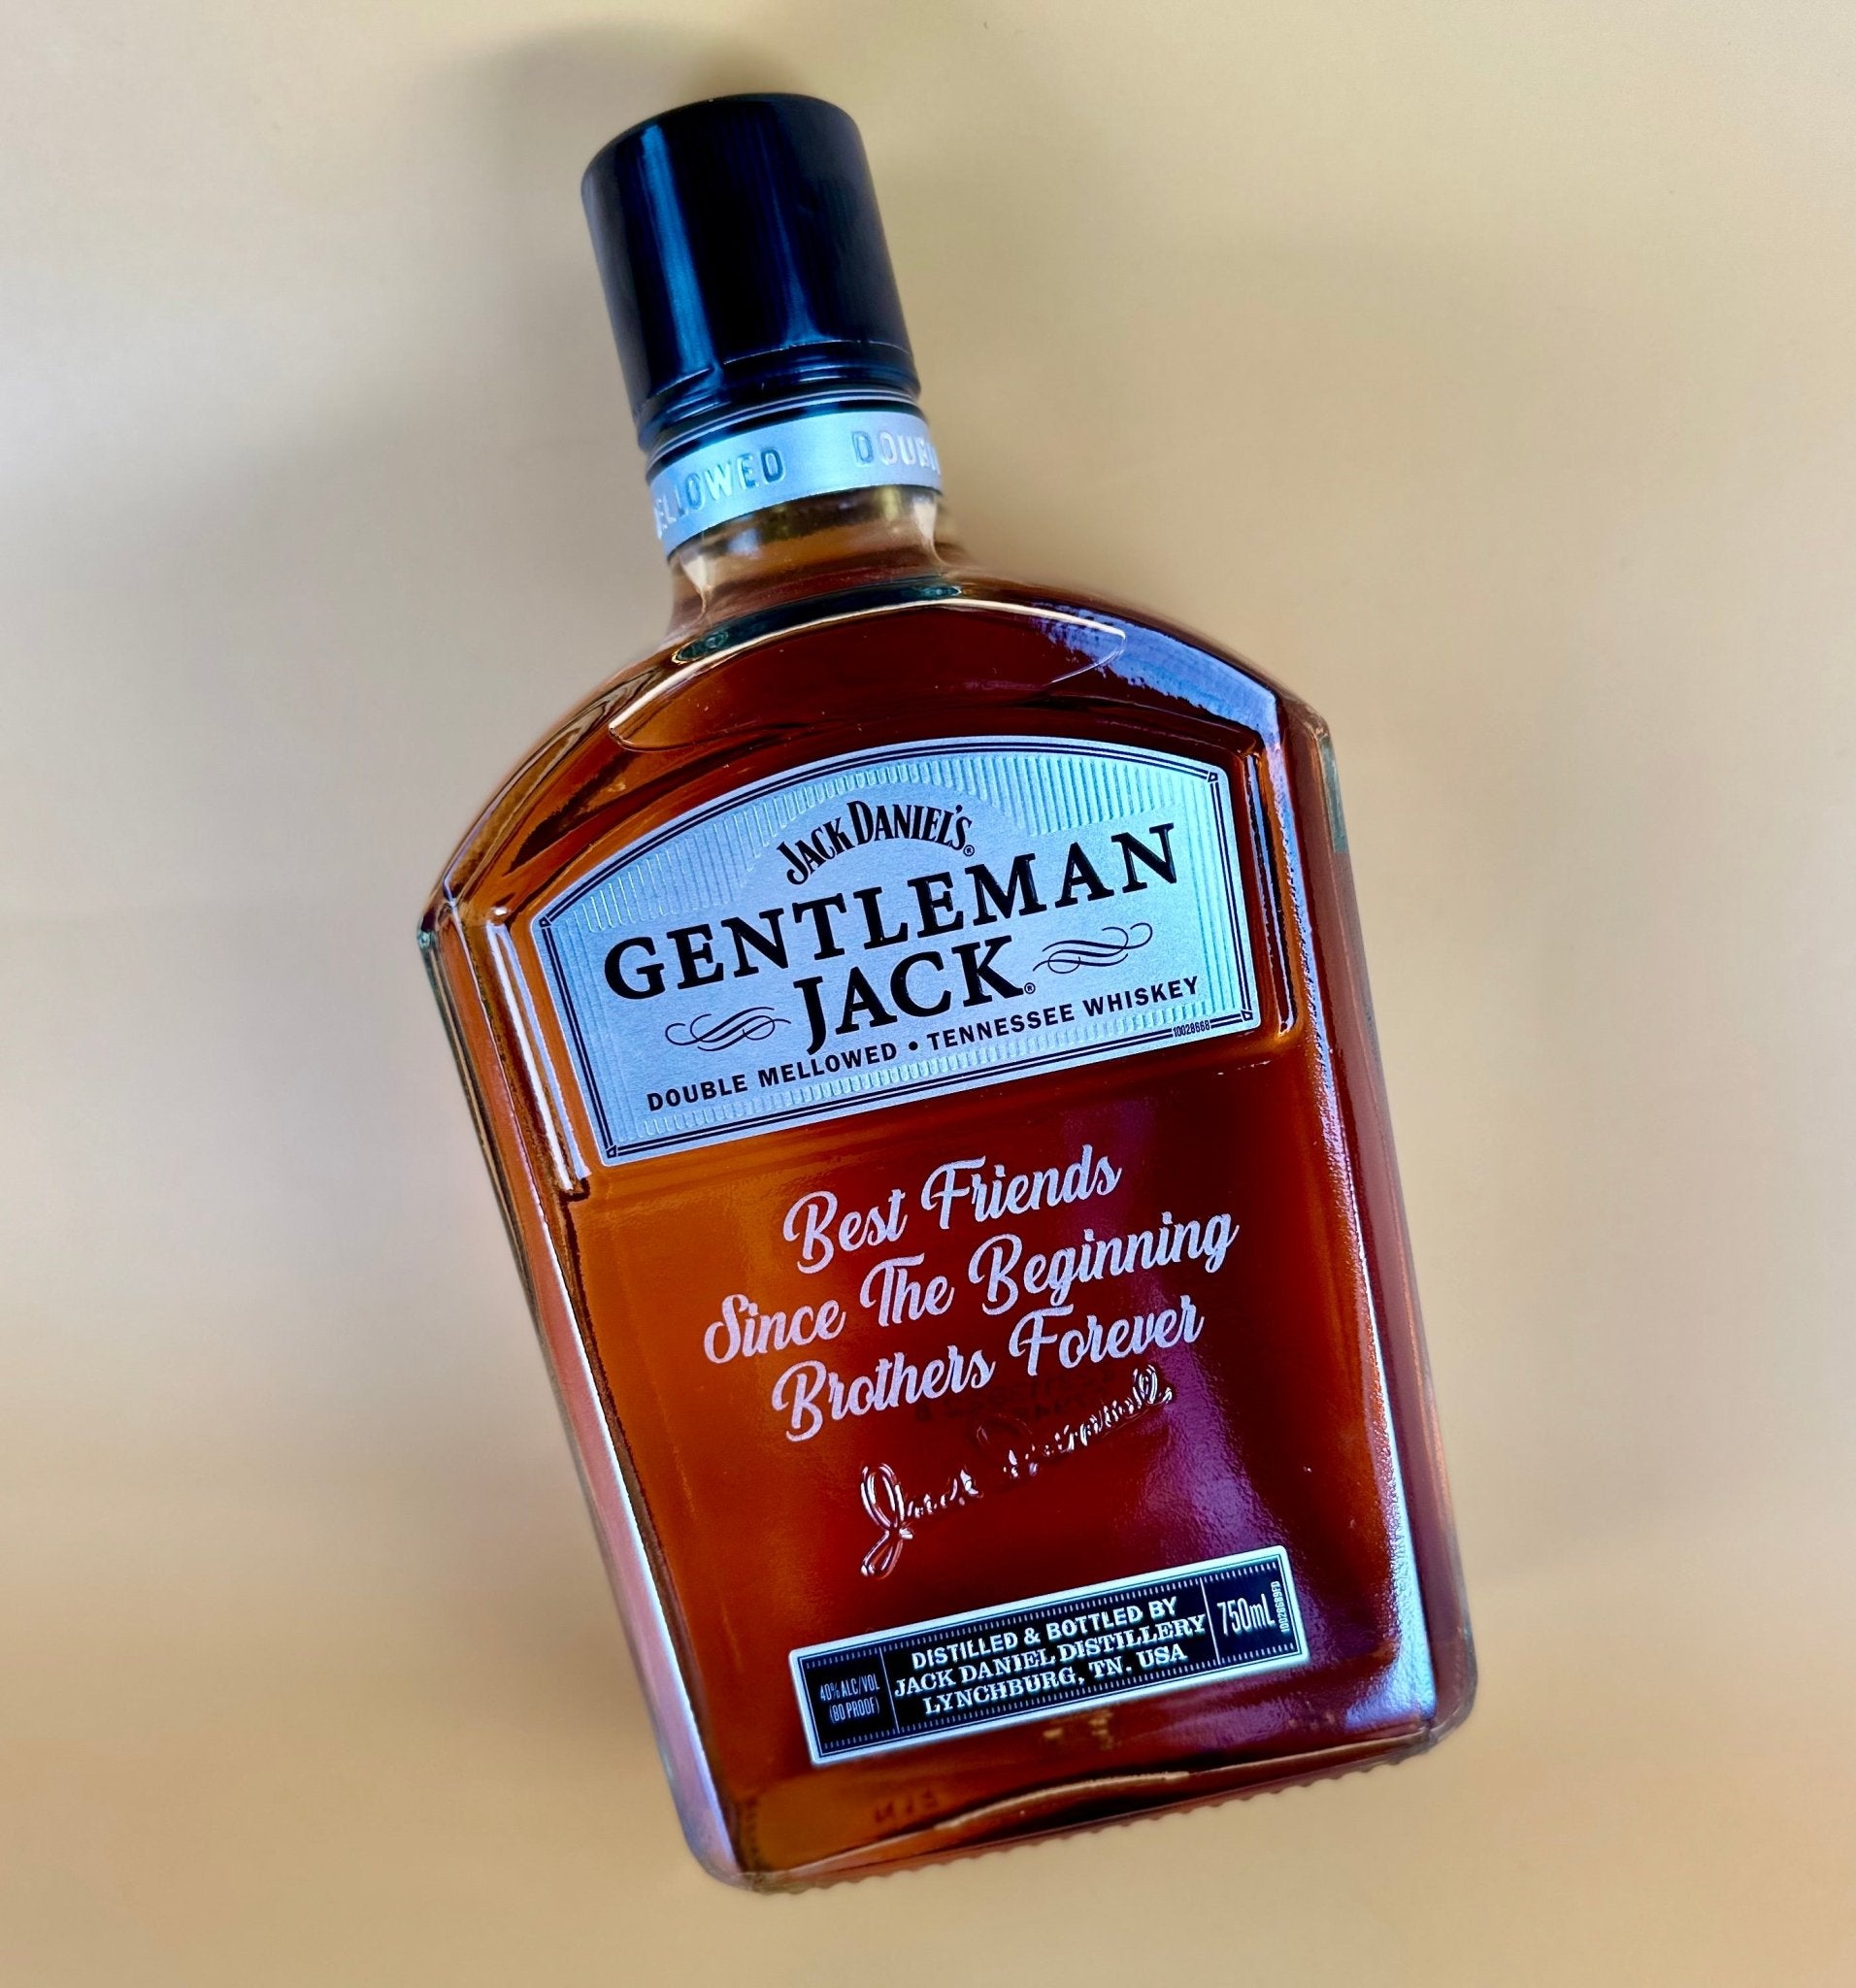 Gentleman Jack Double Mellowed Tennessee Whiskey - Bottle Engraving